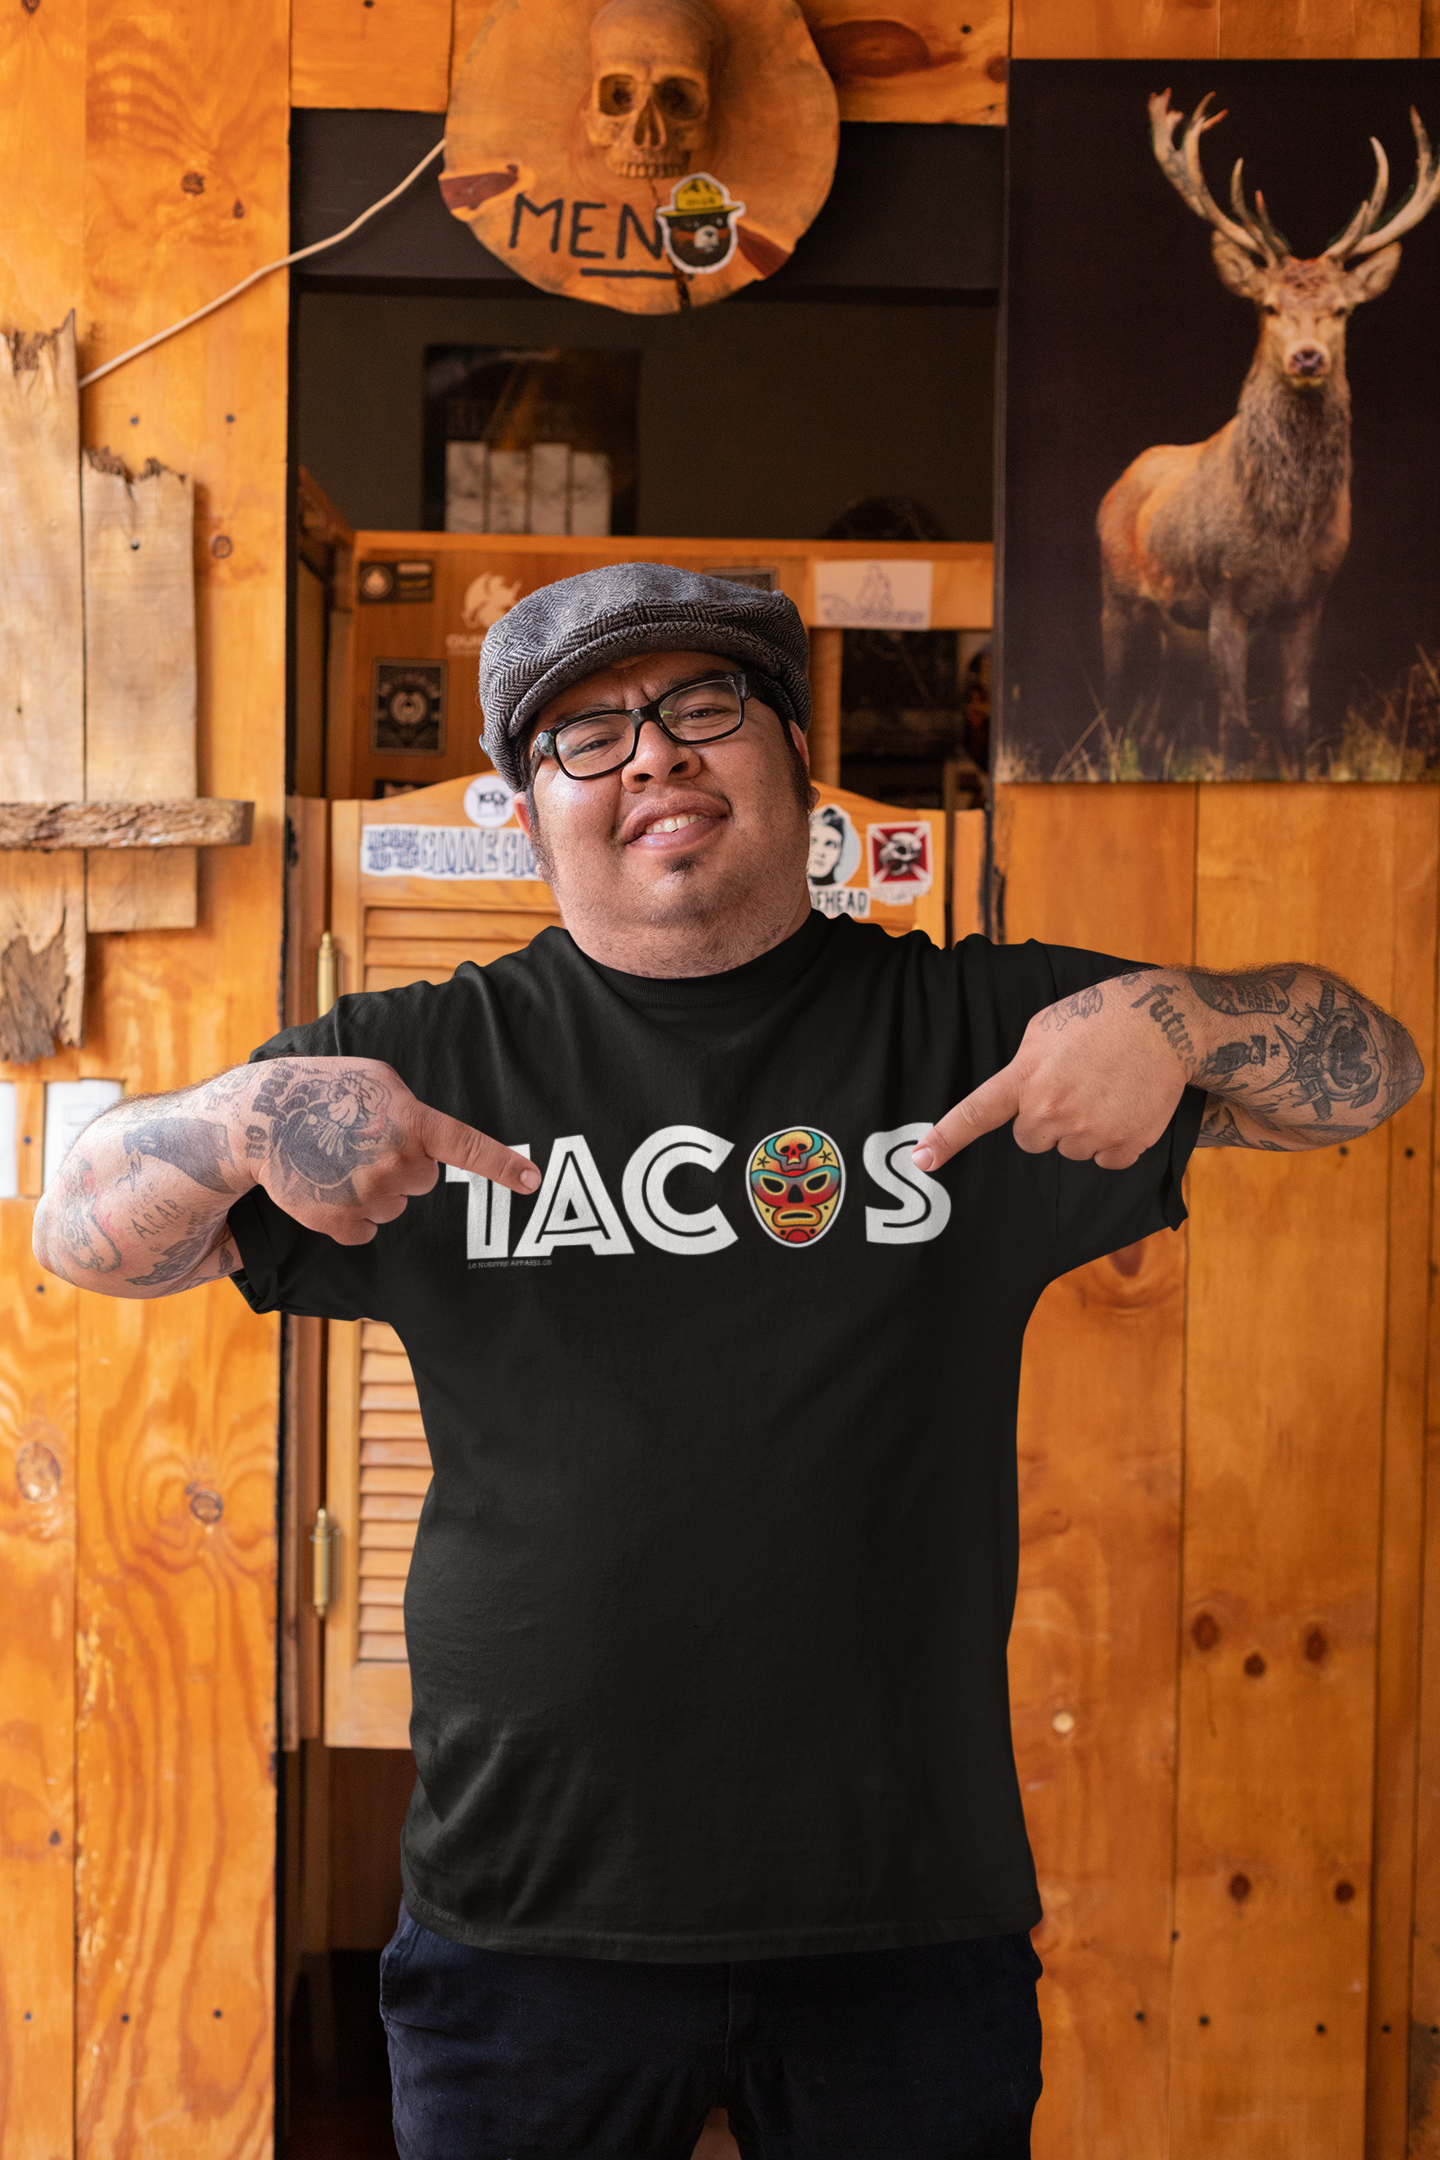 Model showcasing the relaxed fit and stylish design of the "TACOS" T-shirt.